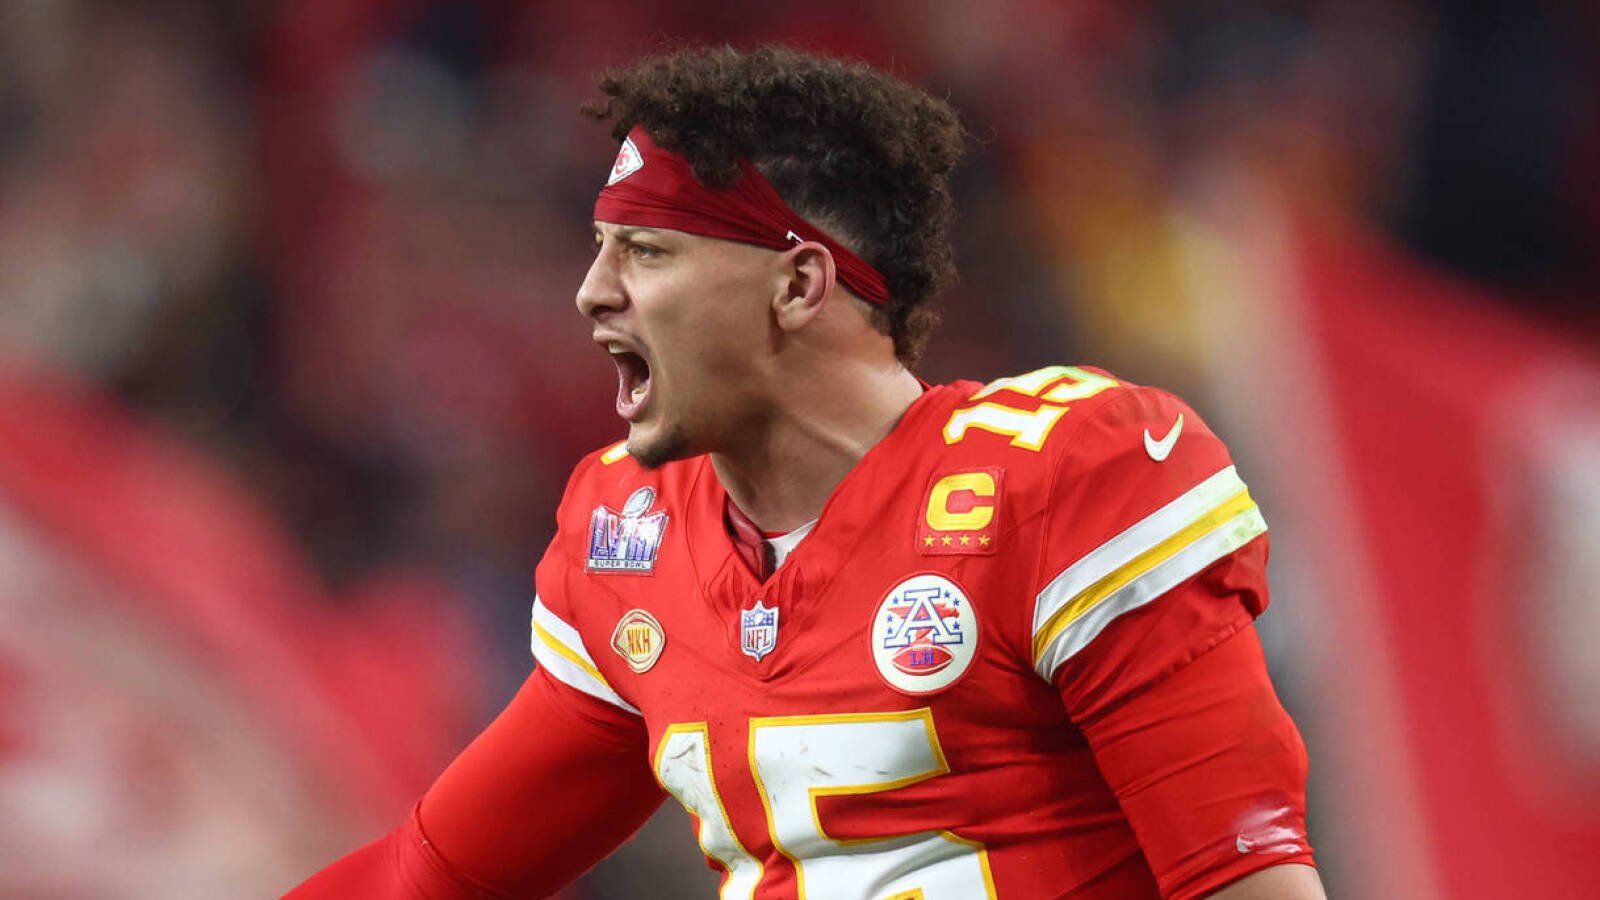 Chiefs already eyeing chance at first NFL three-peat. But it won't be easy